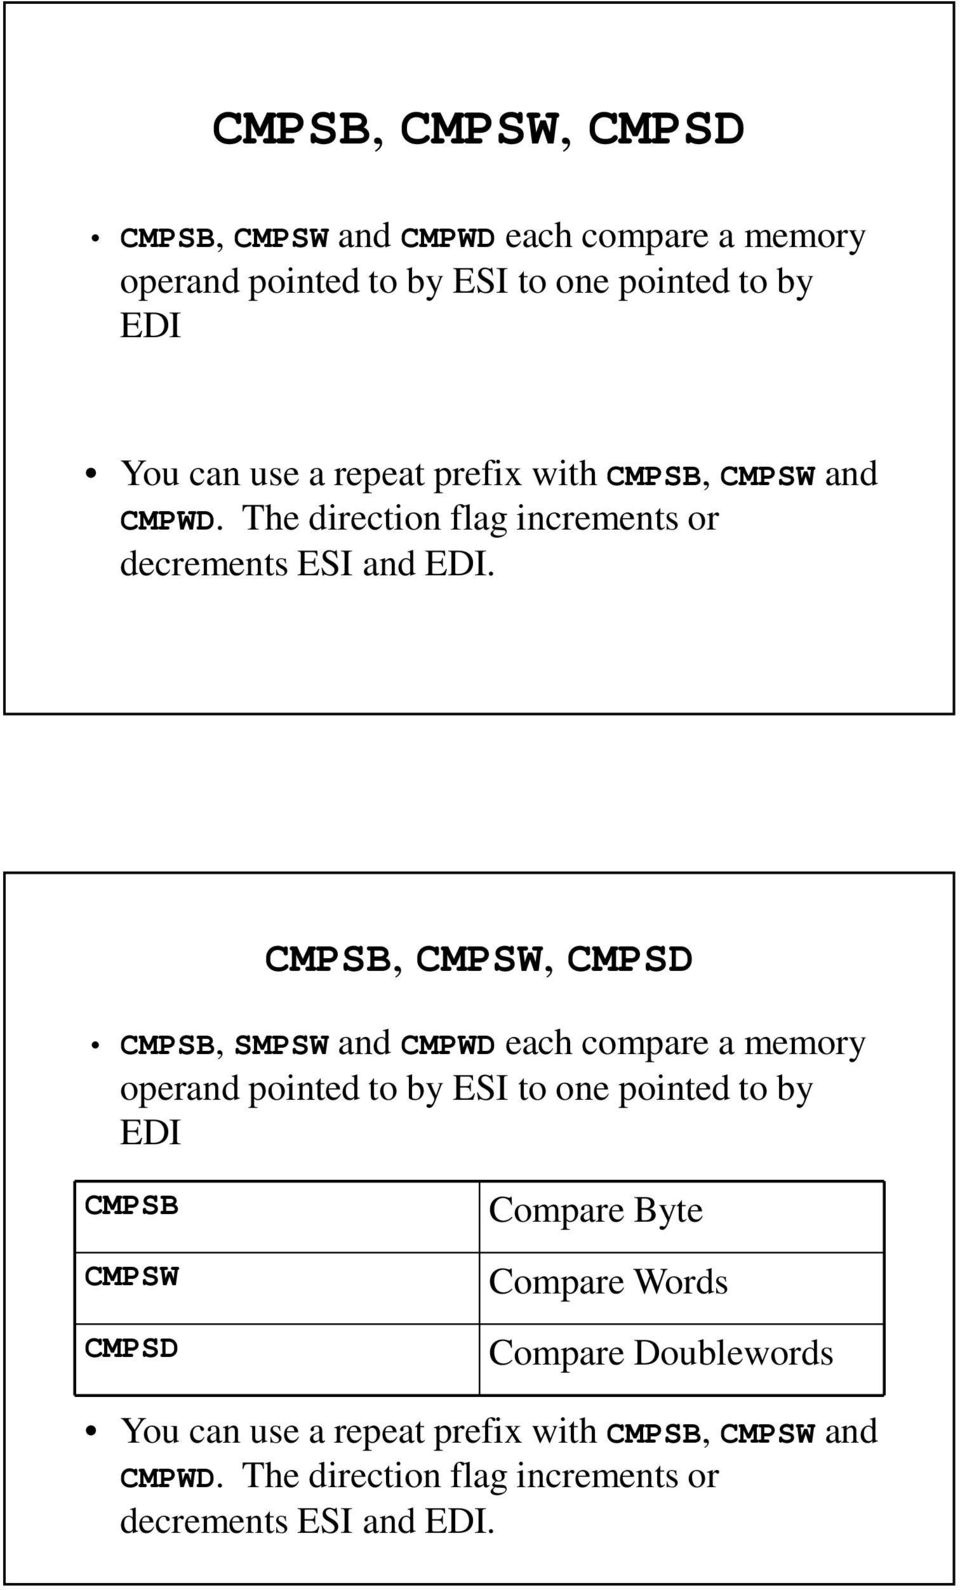 CMPSB, CMPSW, CMPSD CMPSB, SMPSW and CMPWD each compare a memory operand pointed to by ESI to one pointed to by EDI CMPSB CMPSW